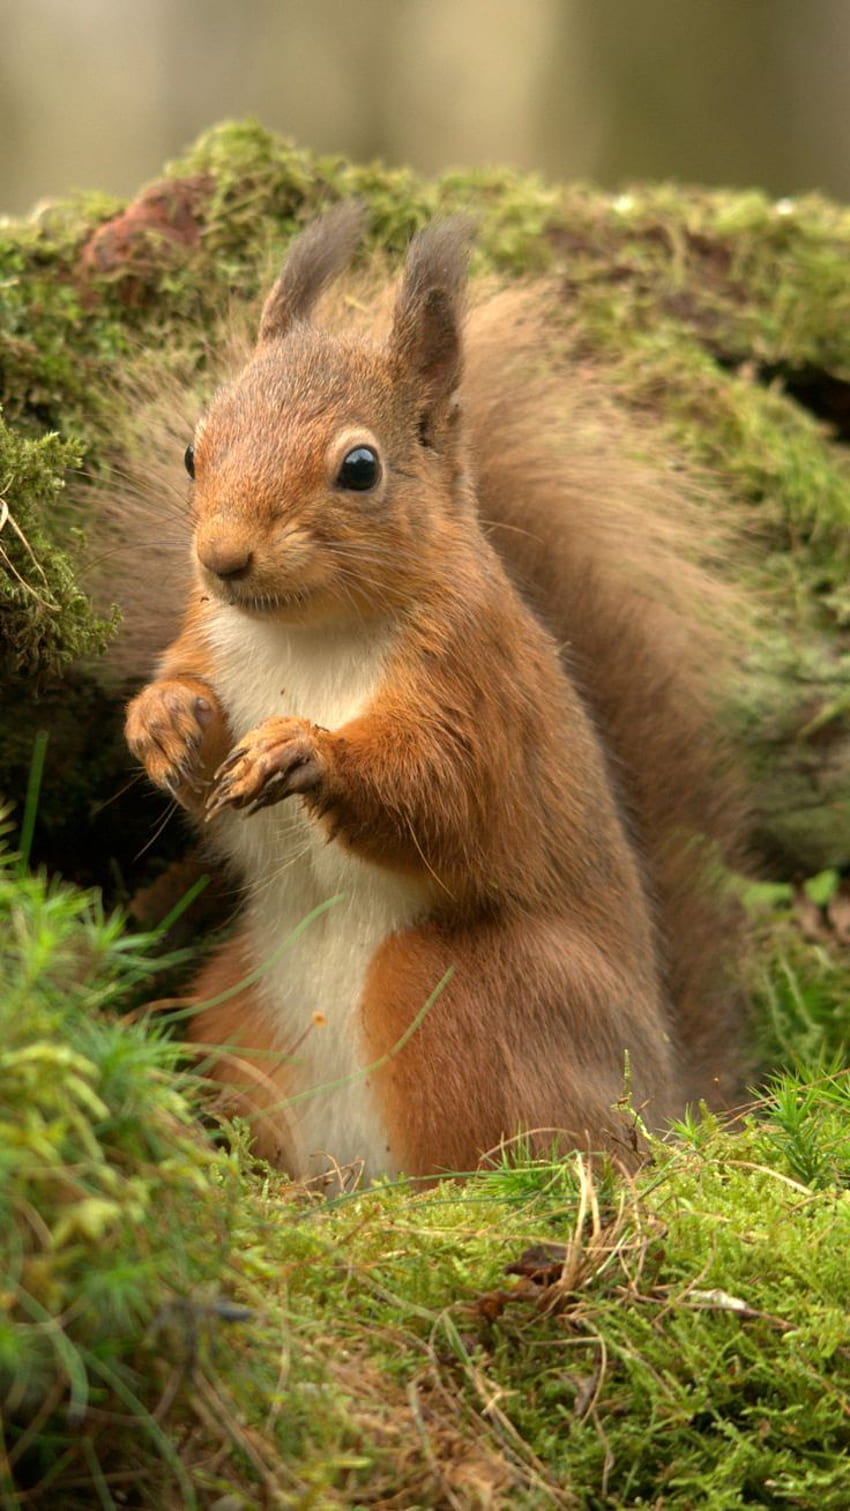 Squirrel Pictures-cute squirrel in a field of green plants and flowers